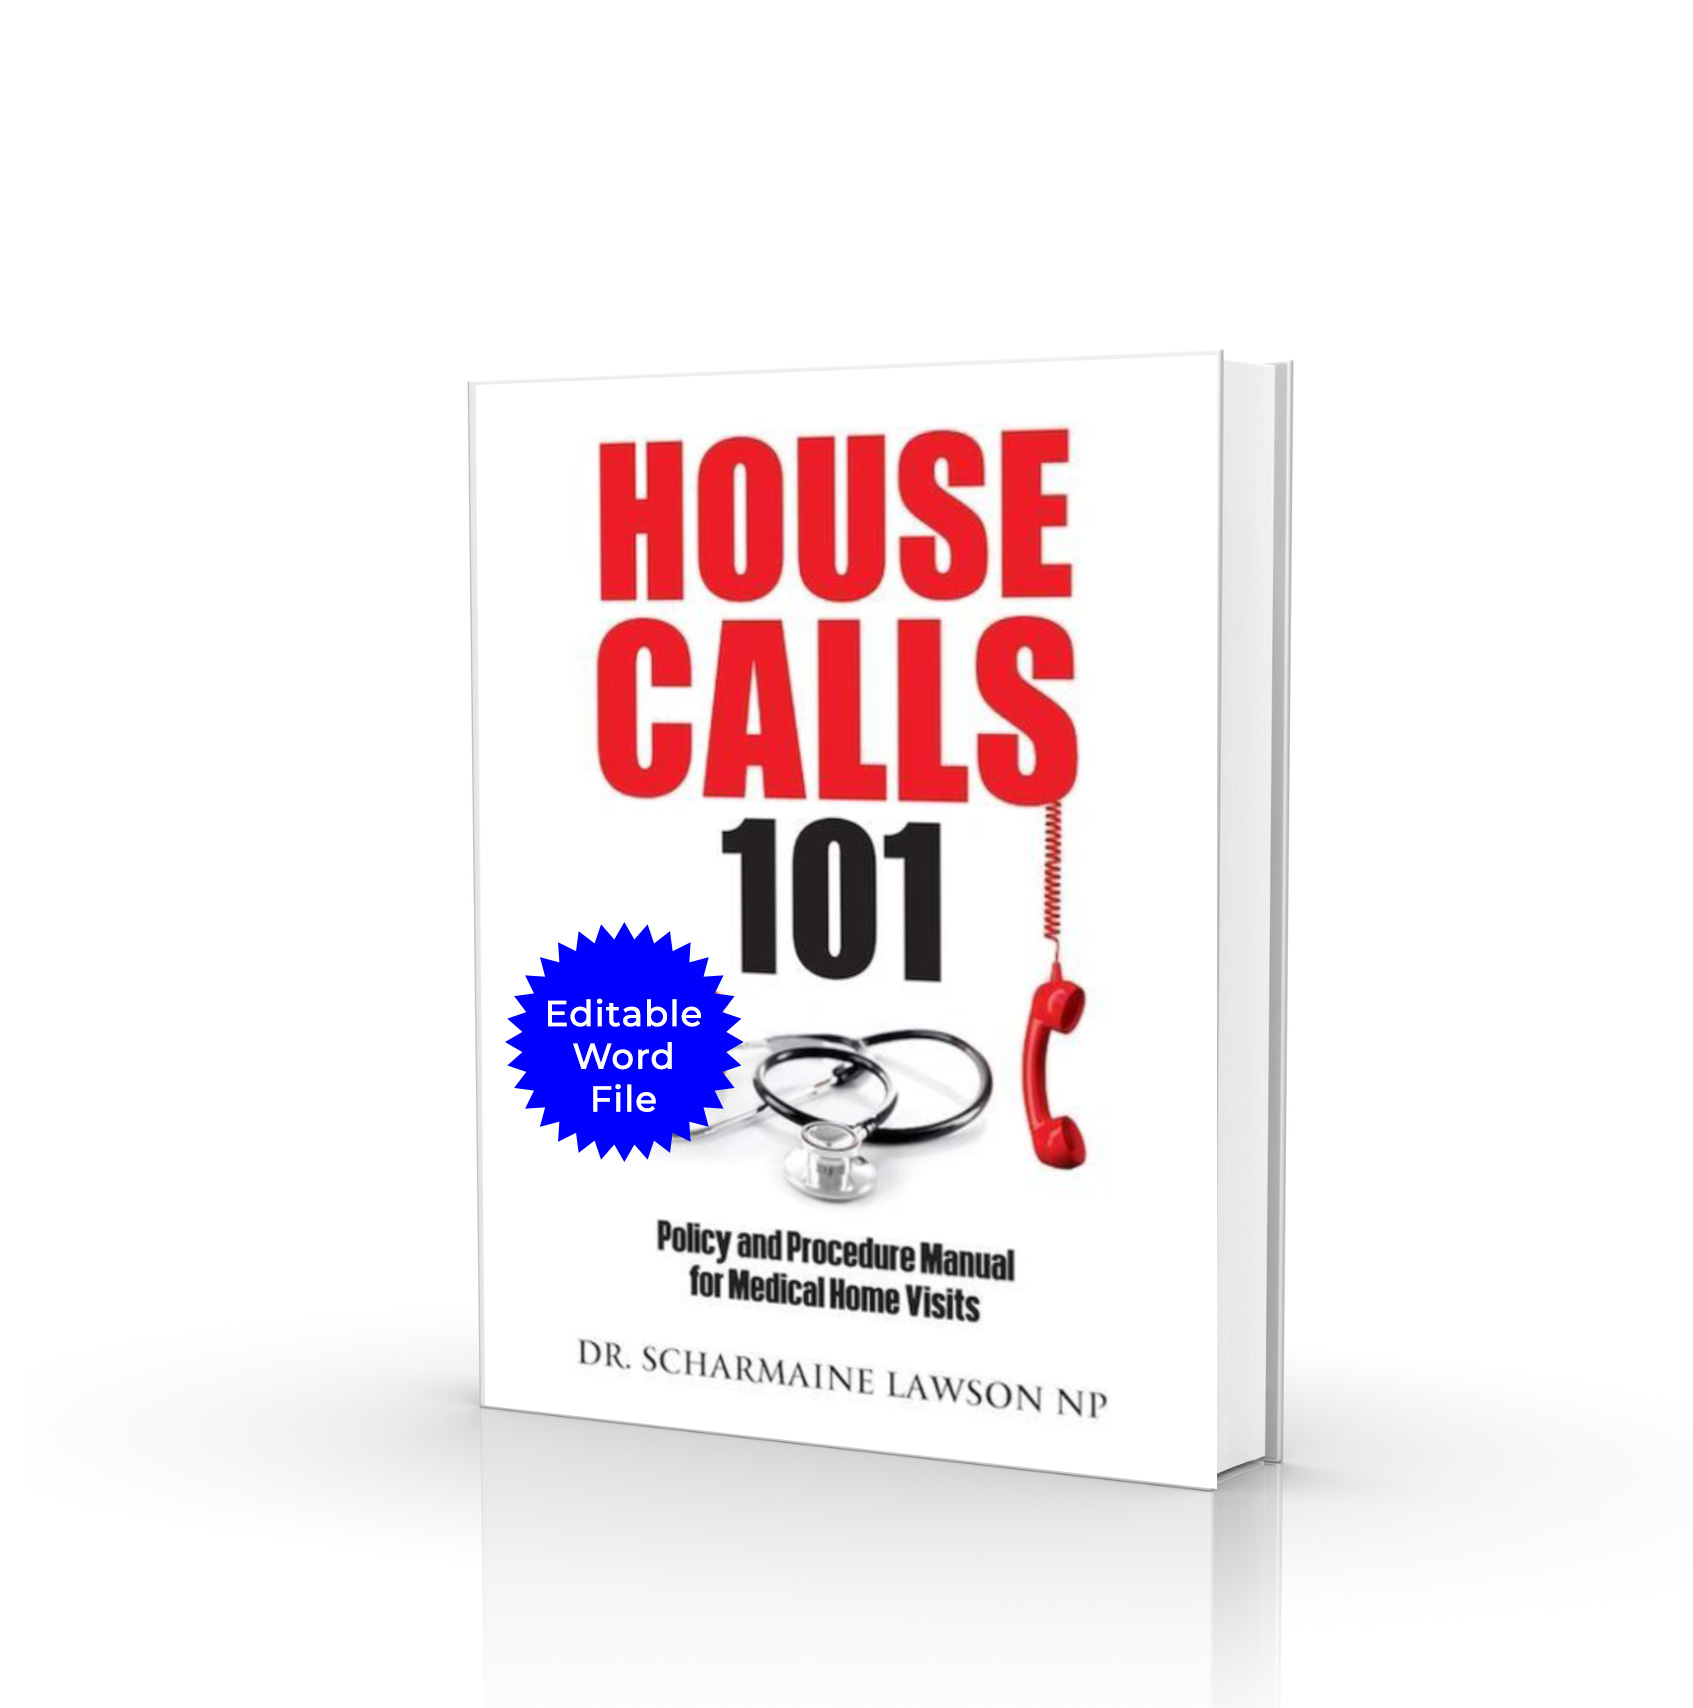 Housecalls 101: Policy and Procedure Manual Editable Word File